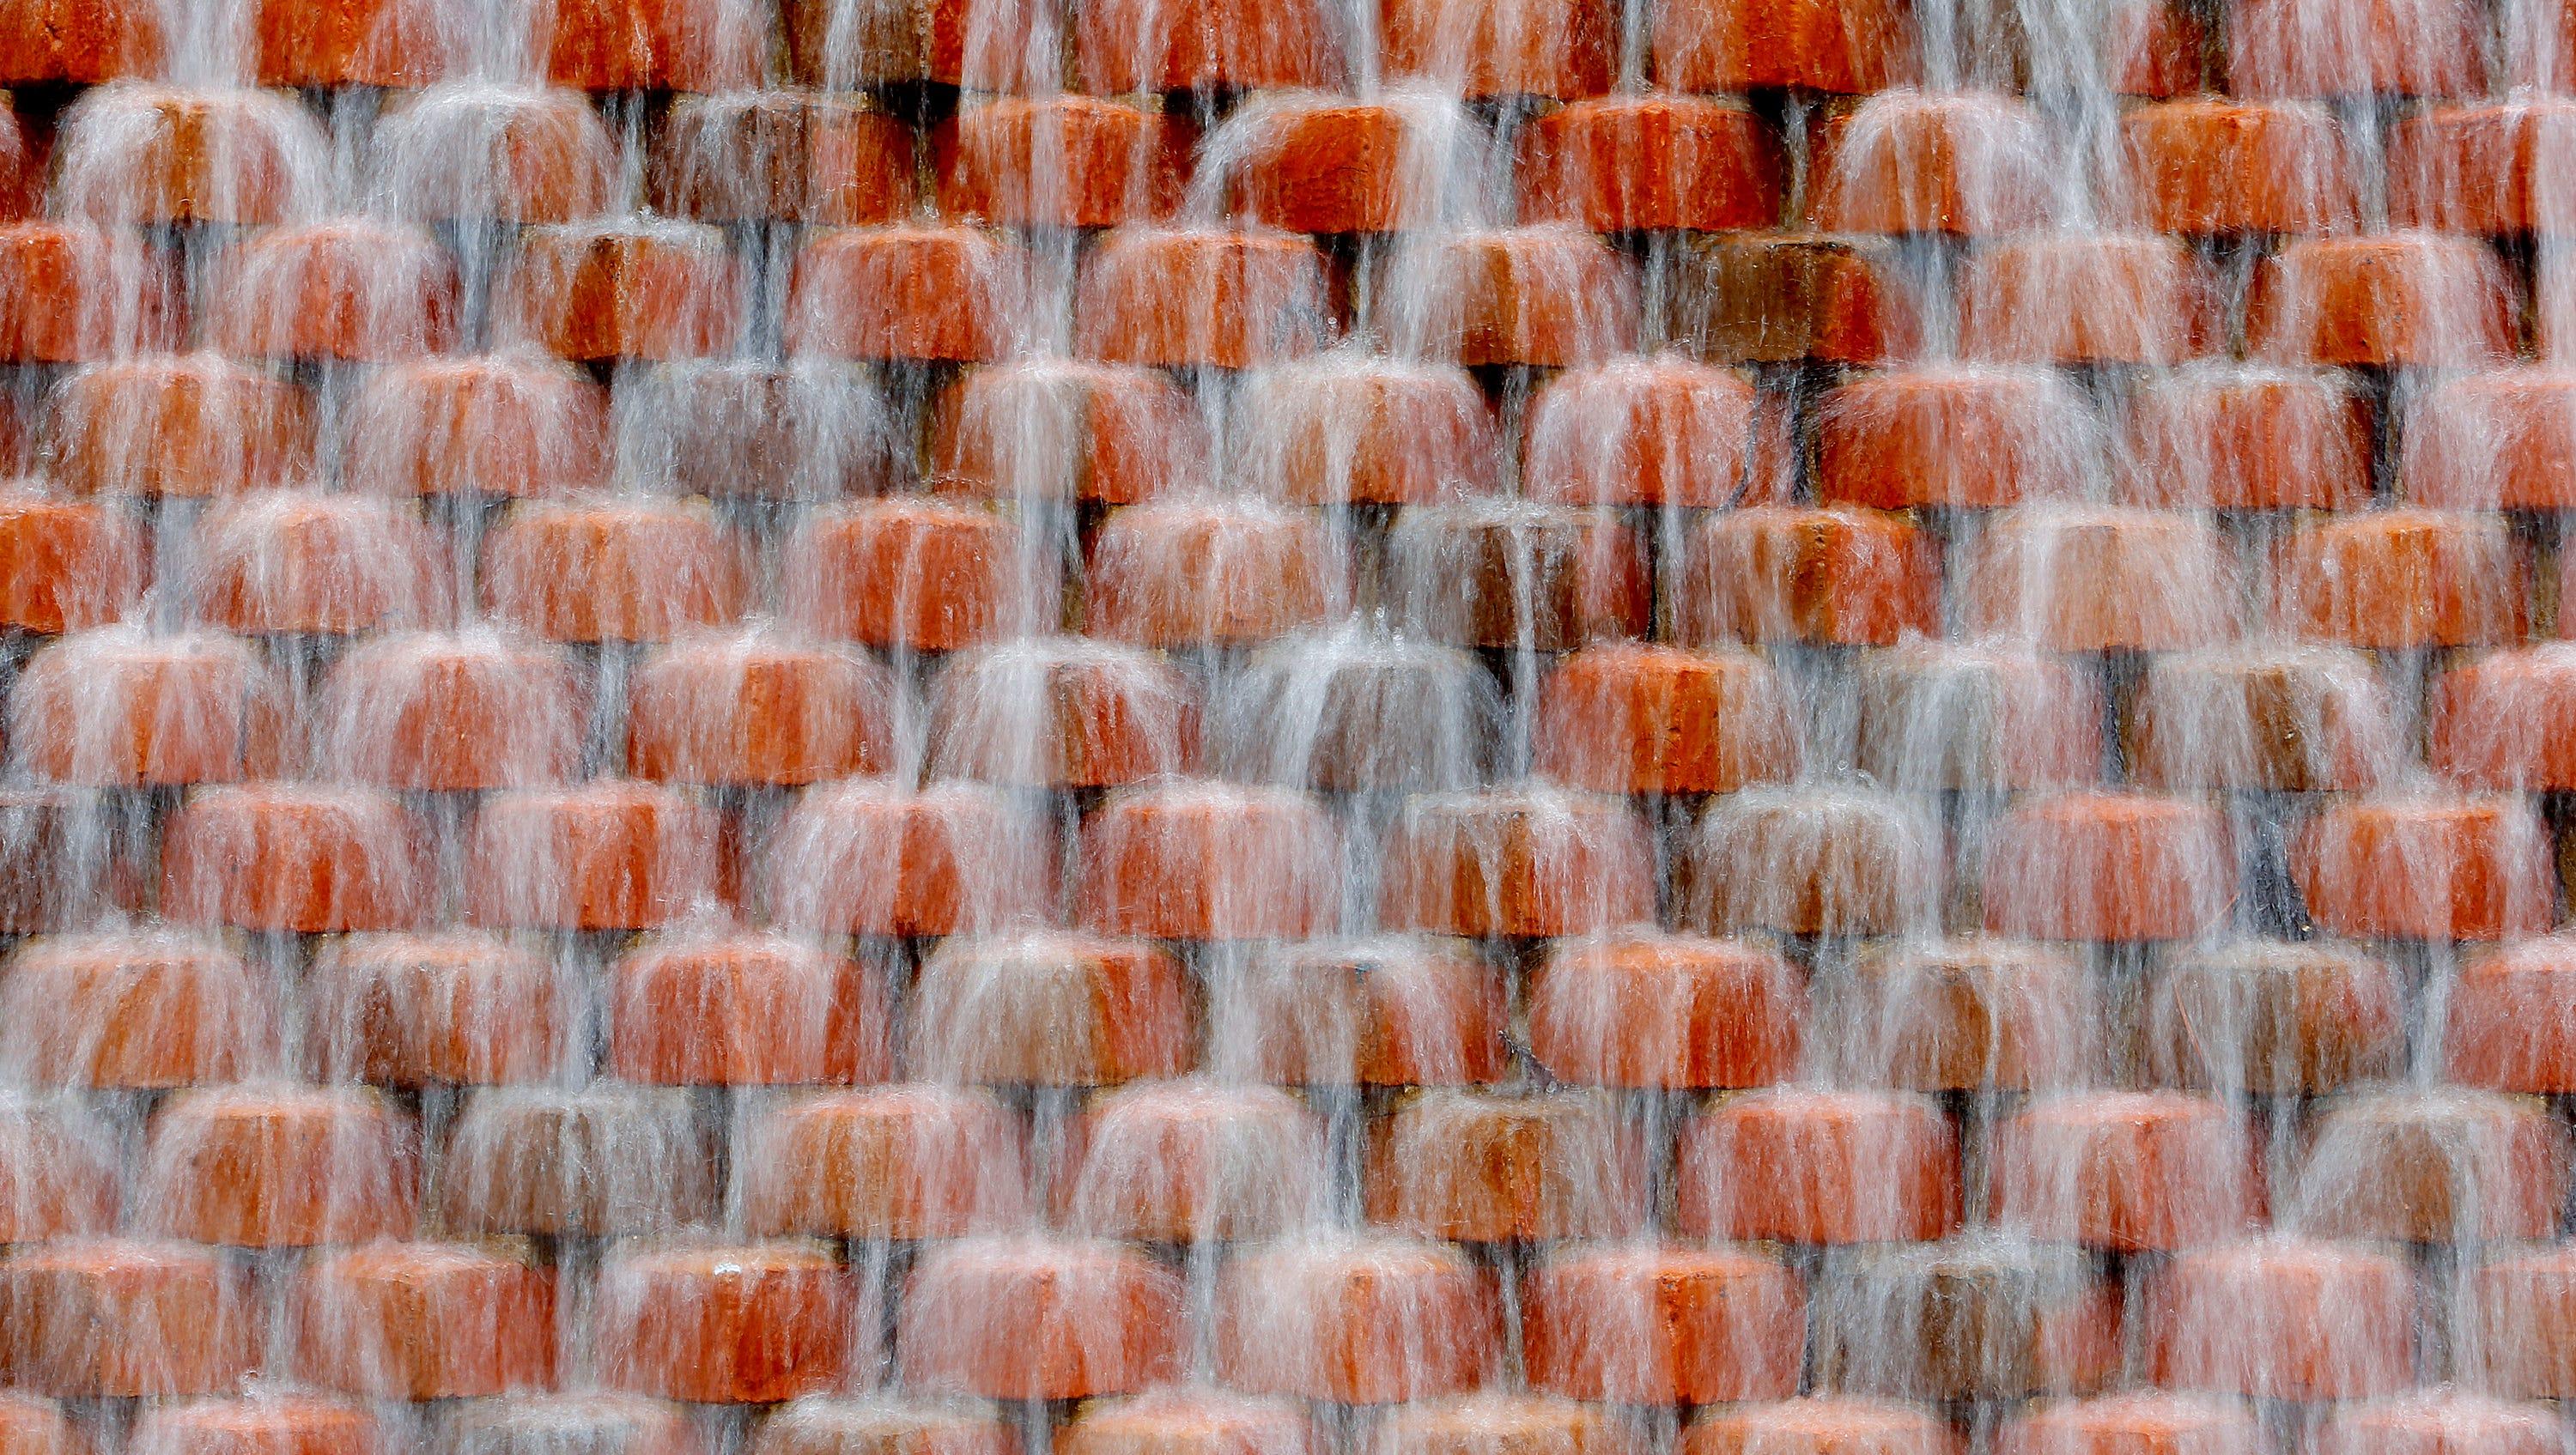 February 8, 2017 - Water cascades down bricks in a fountain located in the meditation garden on the St. Jude campus where founder Danny Thomas was laid to rest.